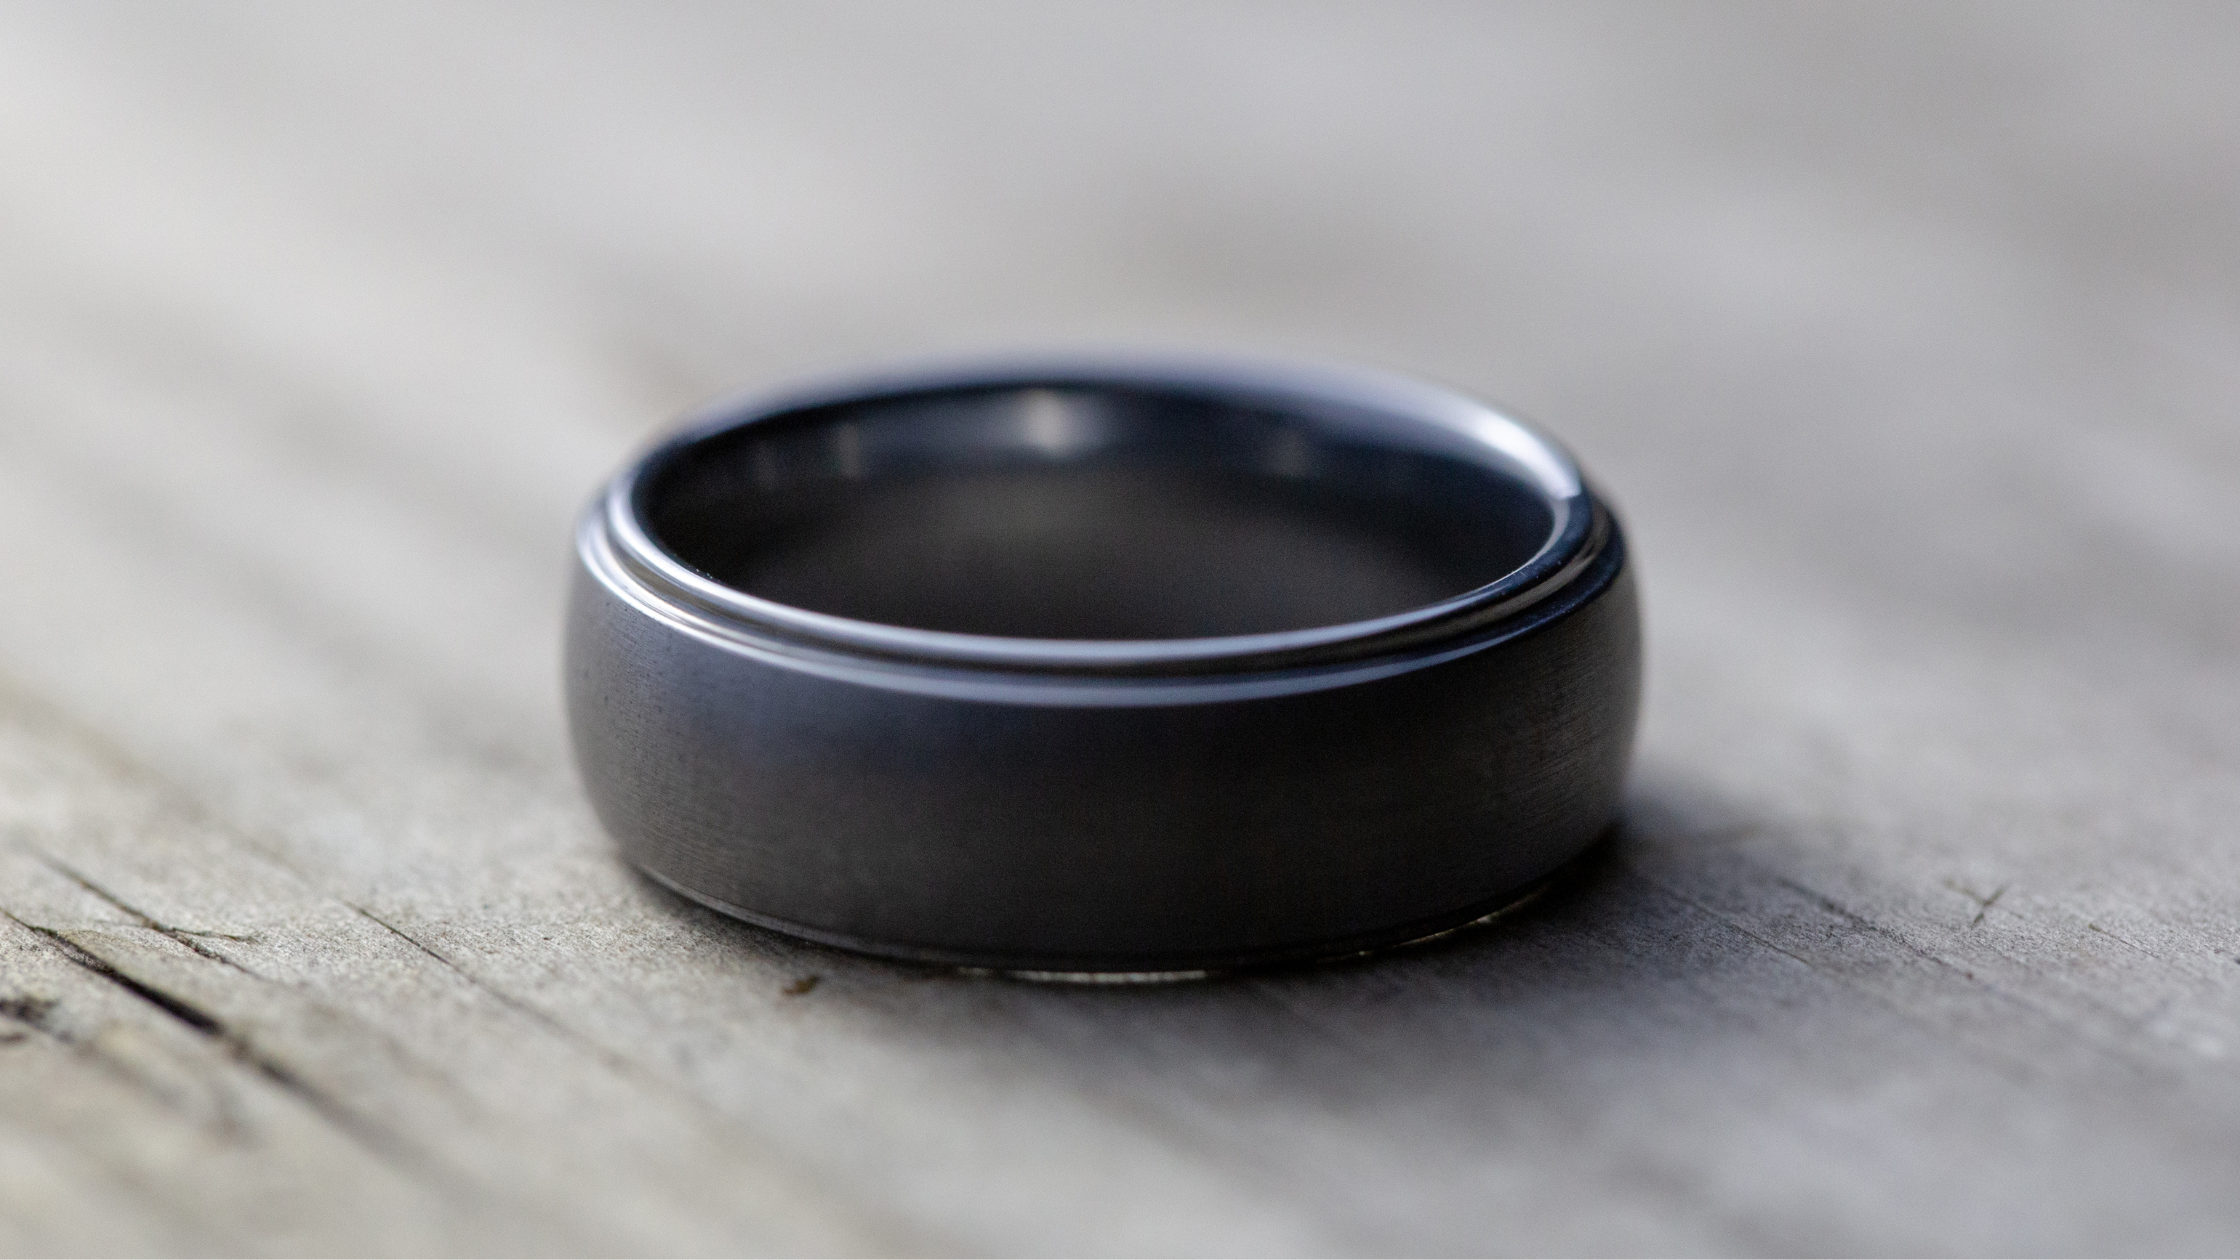 What Are Mens Black Wedding Bands Made Of?